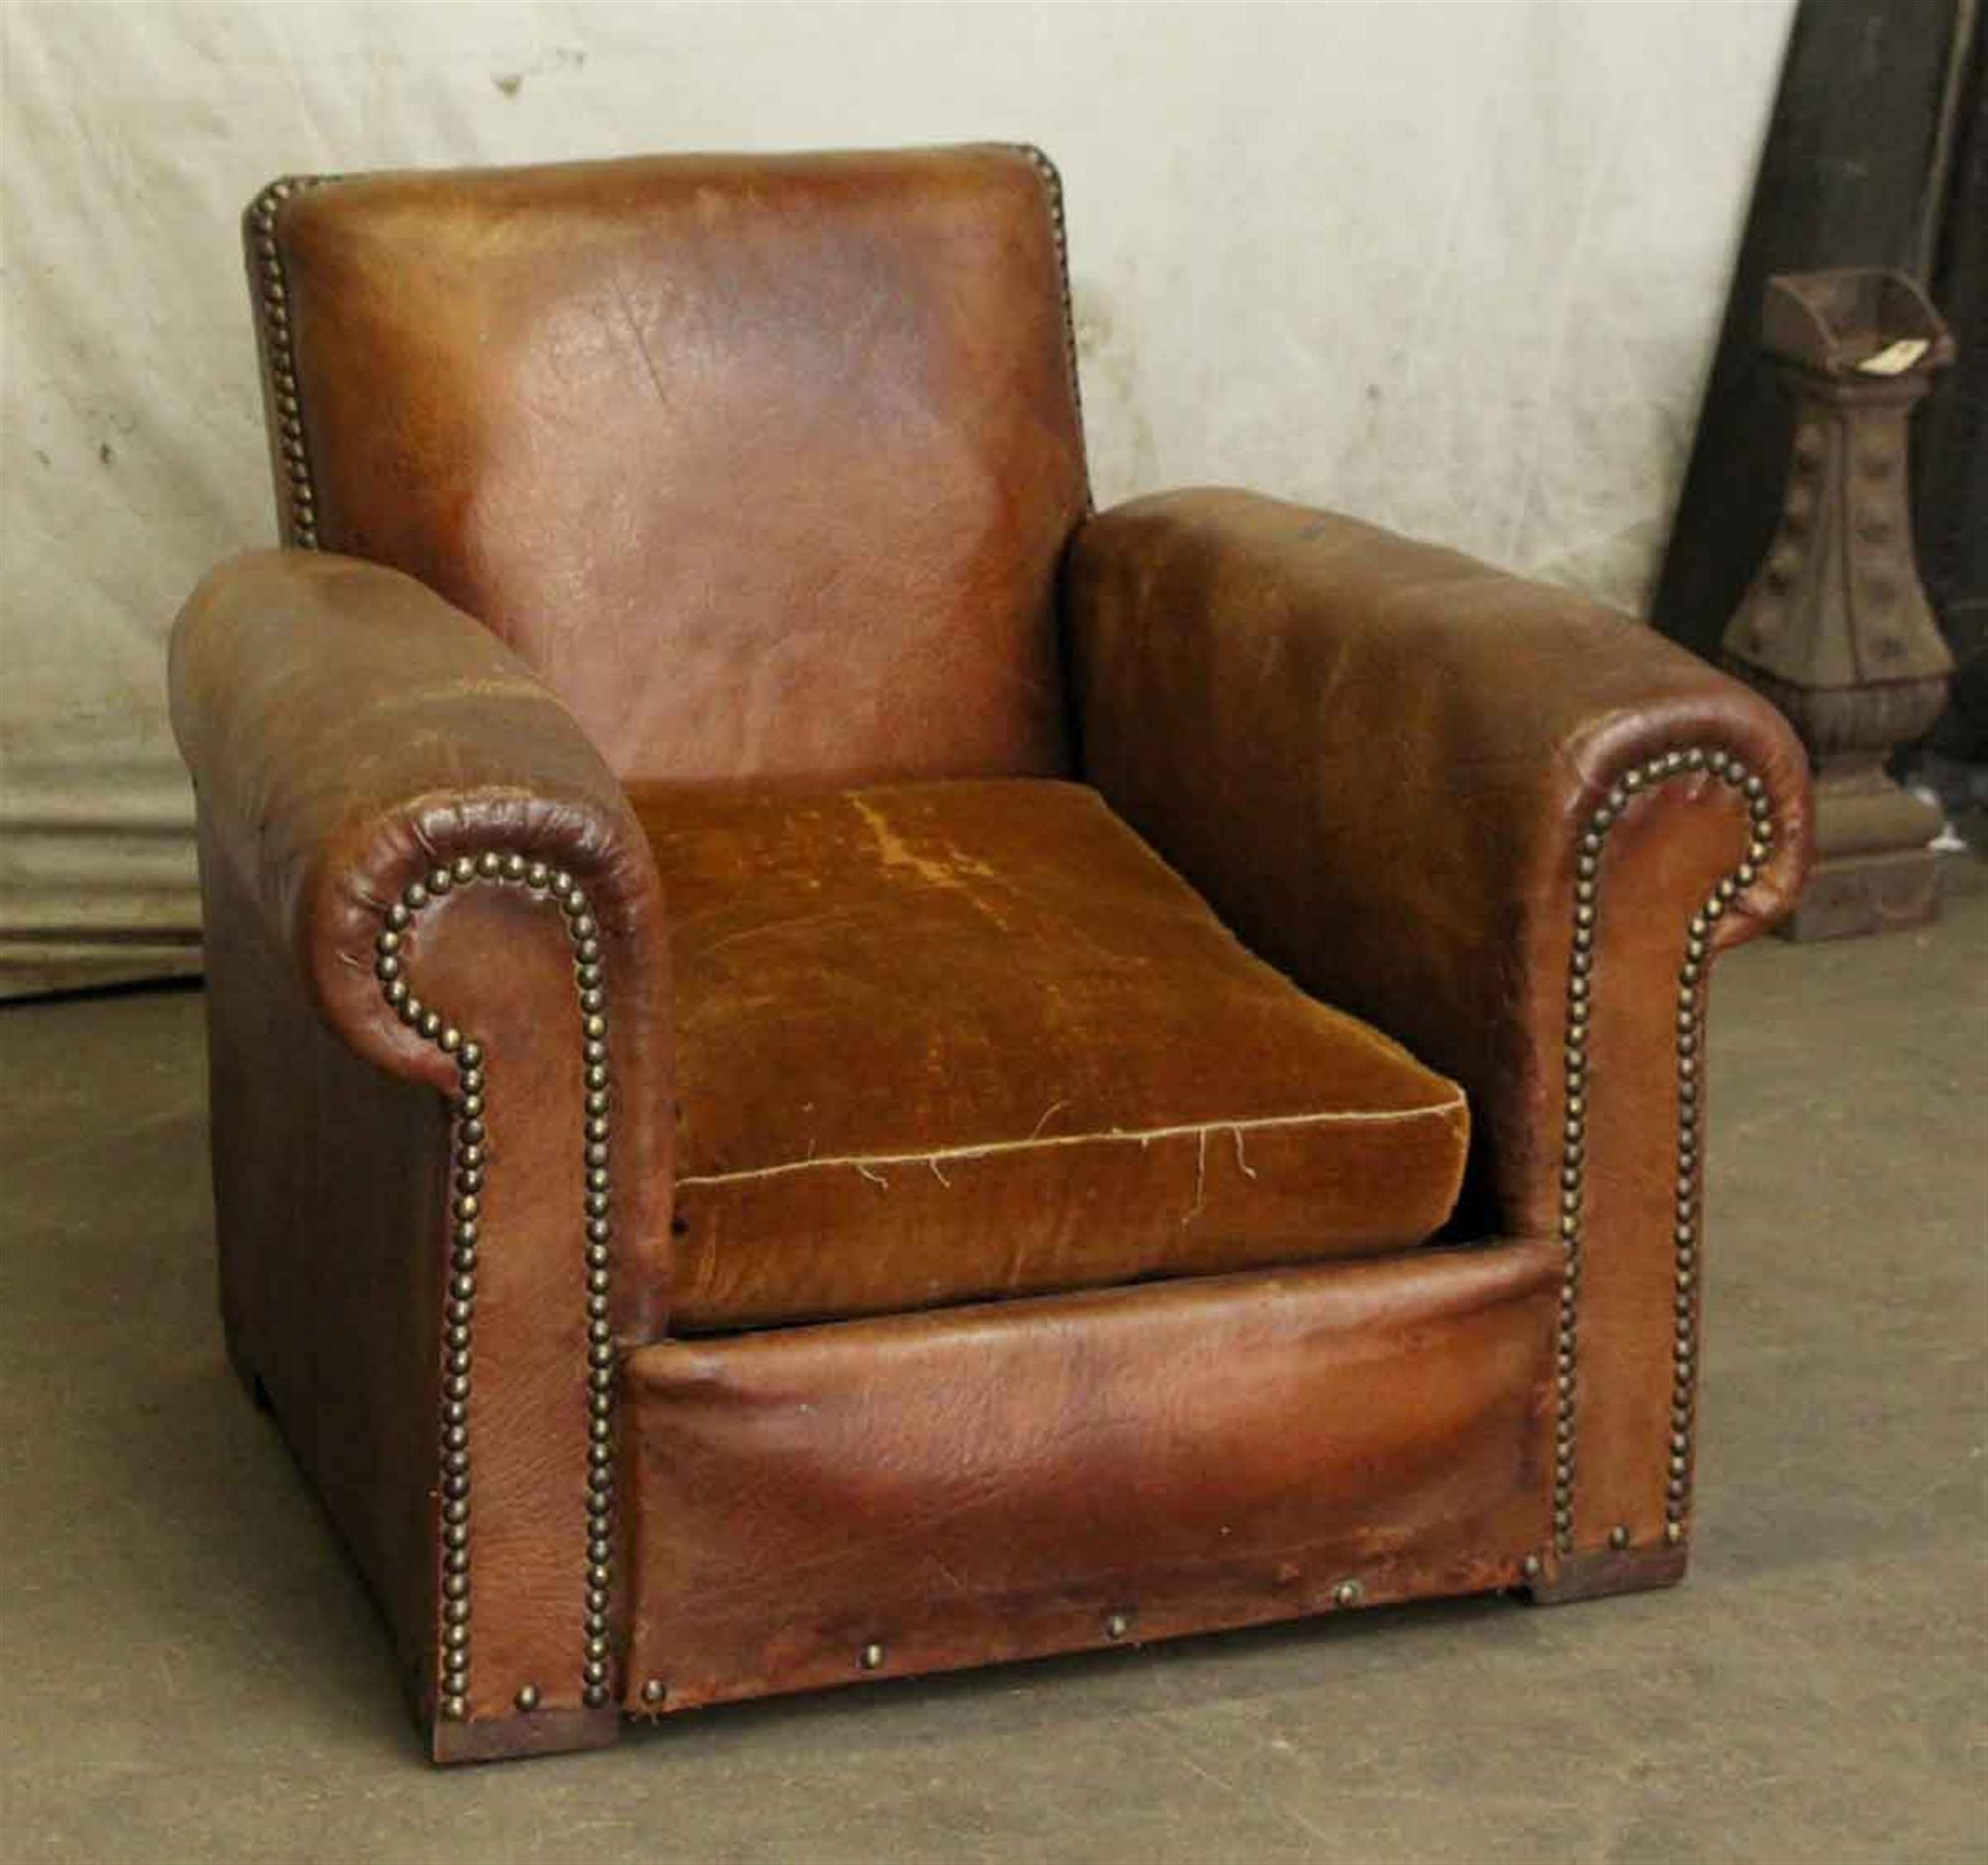 Pair of French beefy leather club chairs with feather filled cushions from the 1980s. Featuring brass studs along the front seams in front and around the back. The cushions are worn with fraying on the edges. These can be seen at our 91 8th Ave